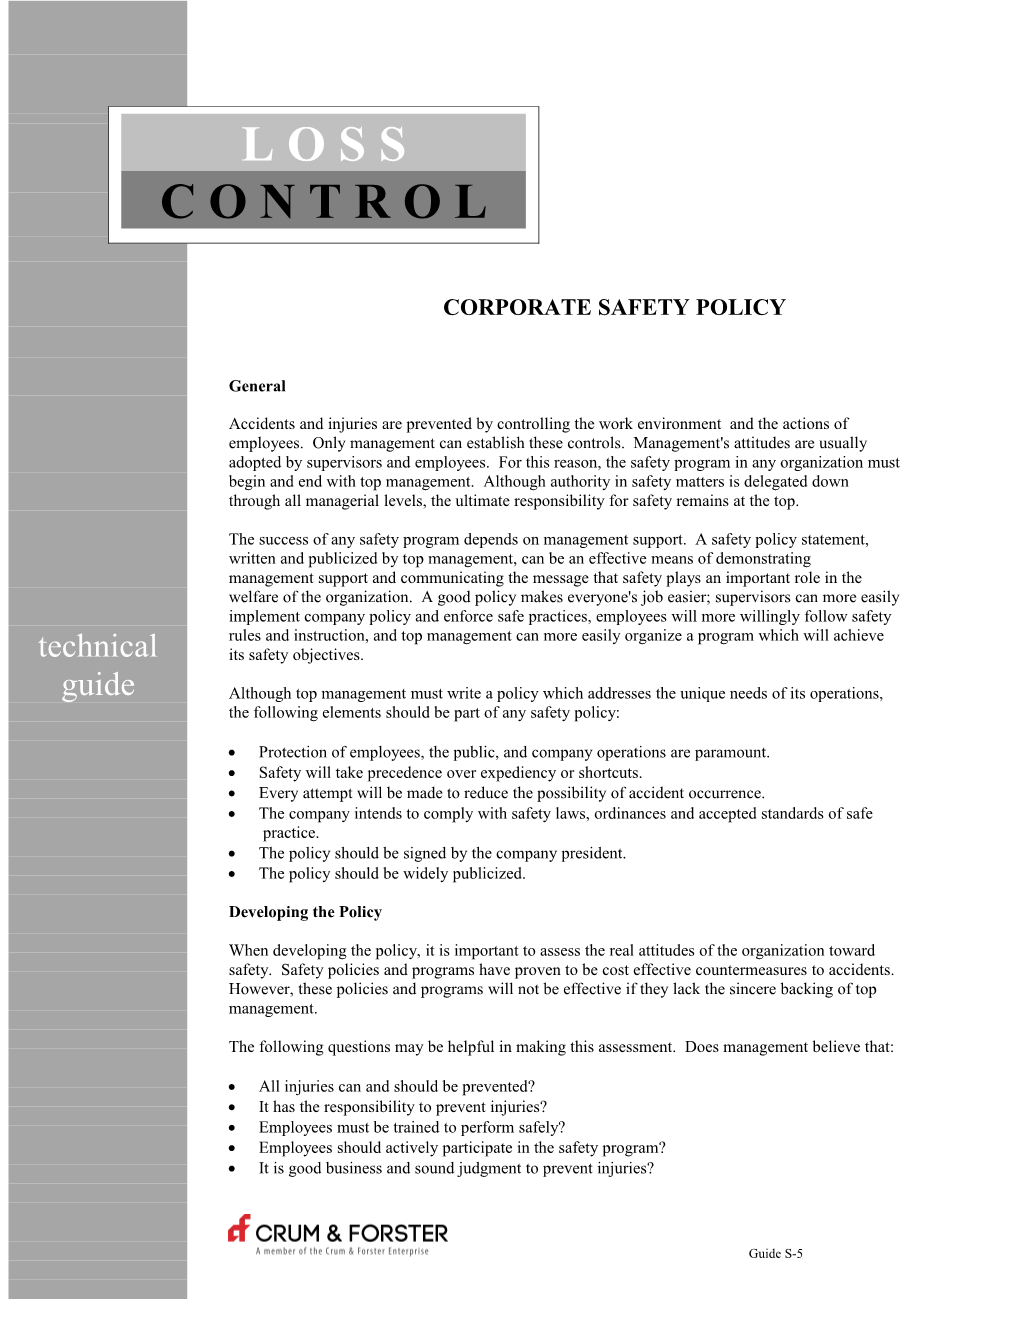 Corporate Safety Policy